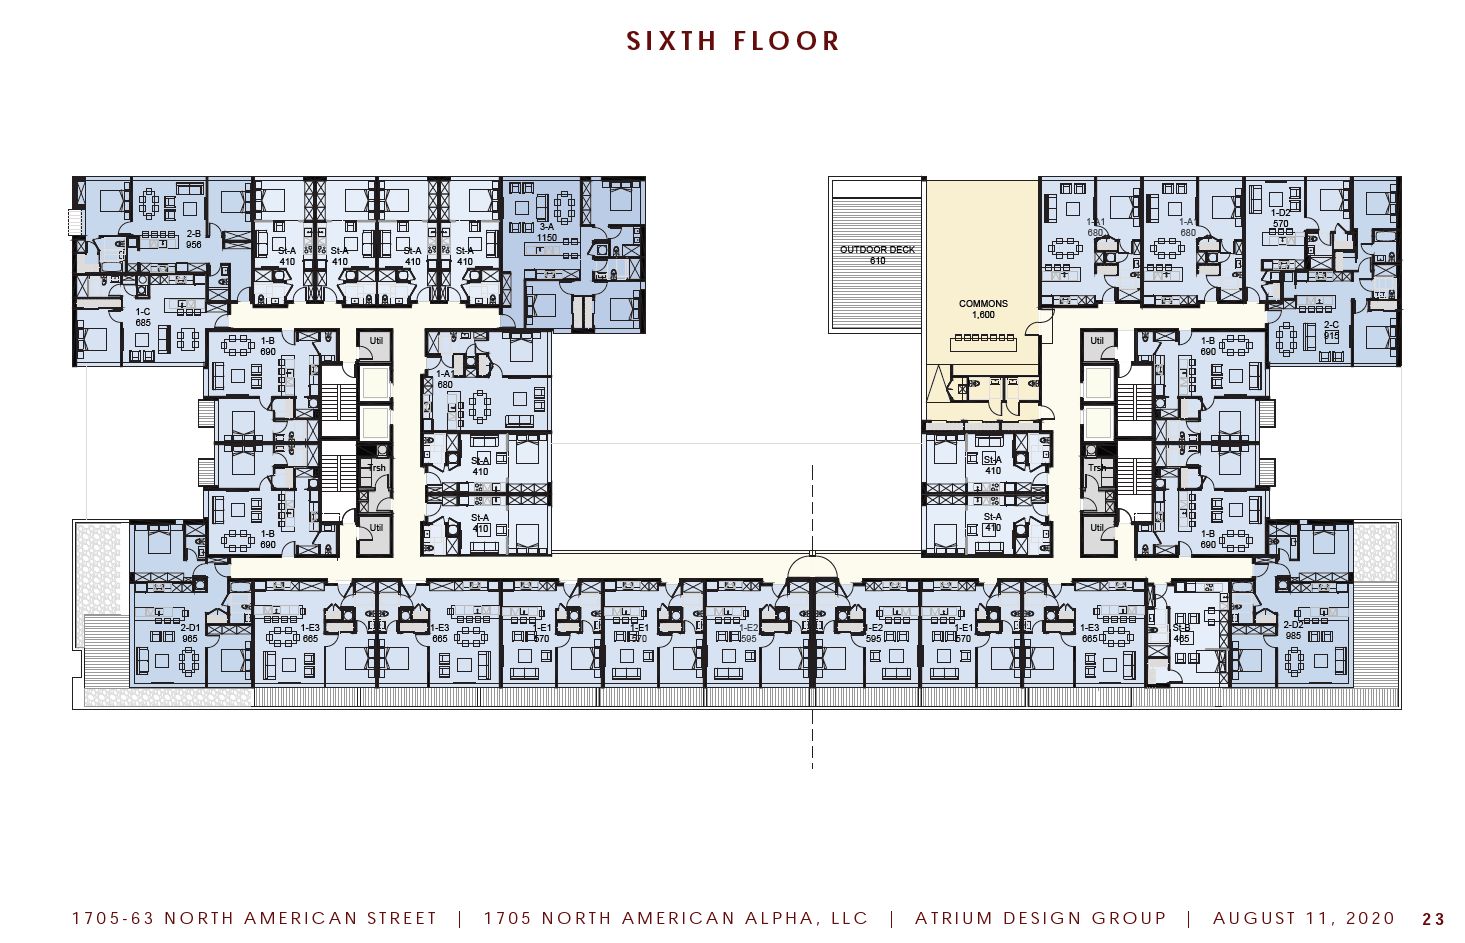 The Luxe Phase I at 1705 North American Street. Floor plan. Credit: Atrium Design Group via Civic Design Review